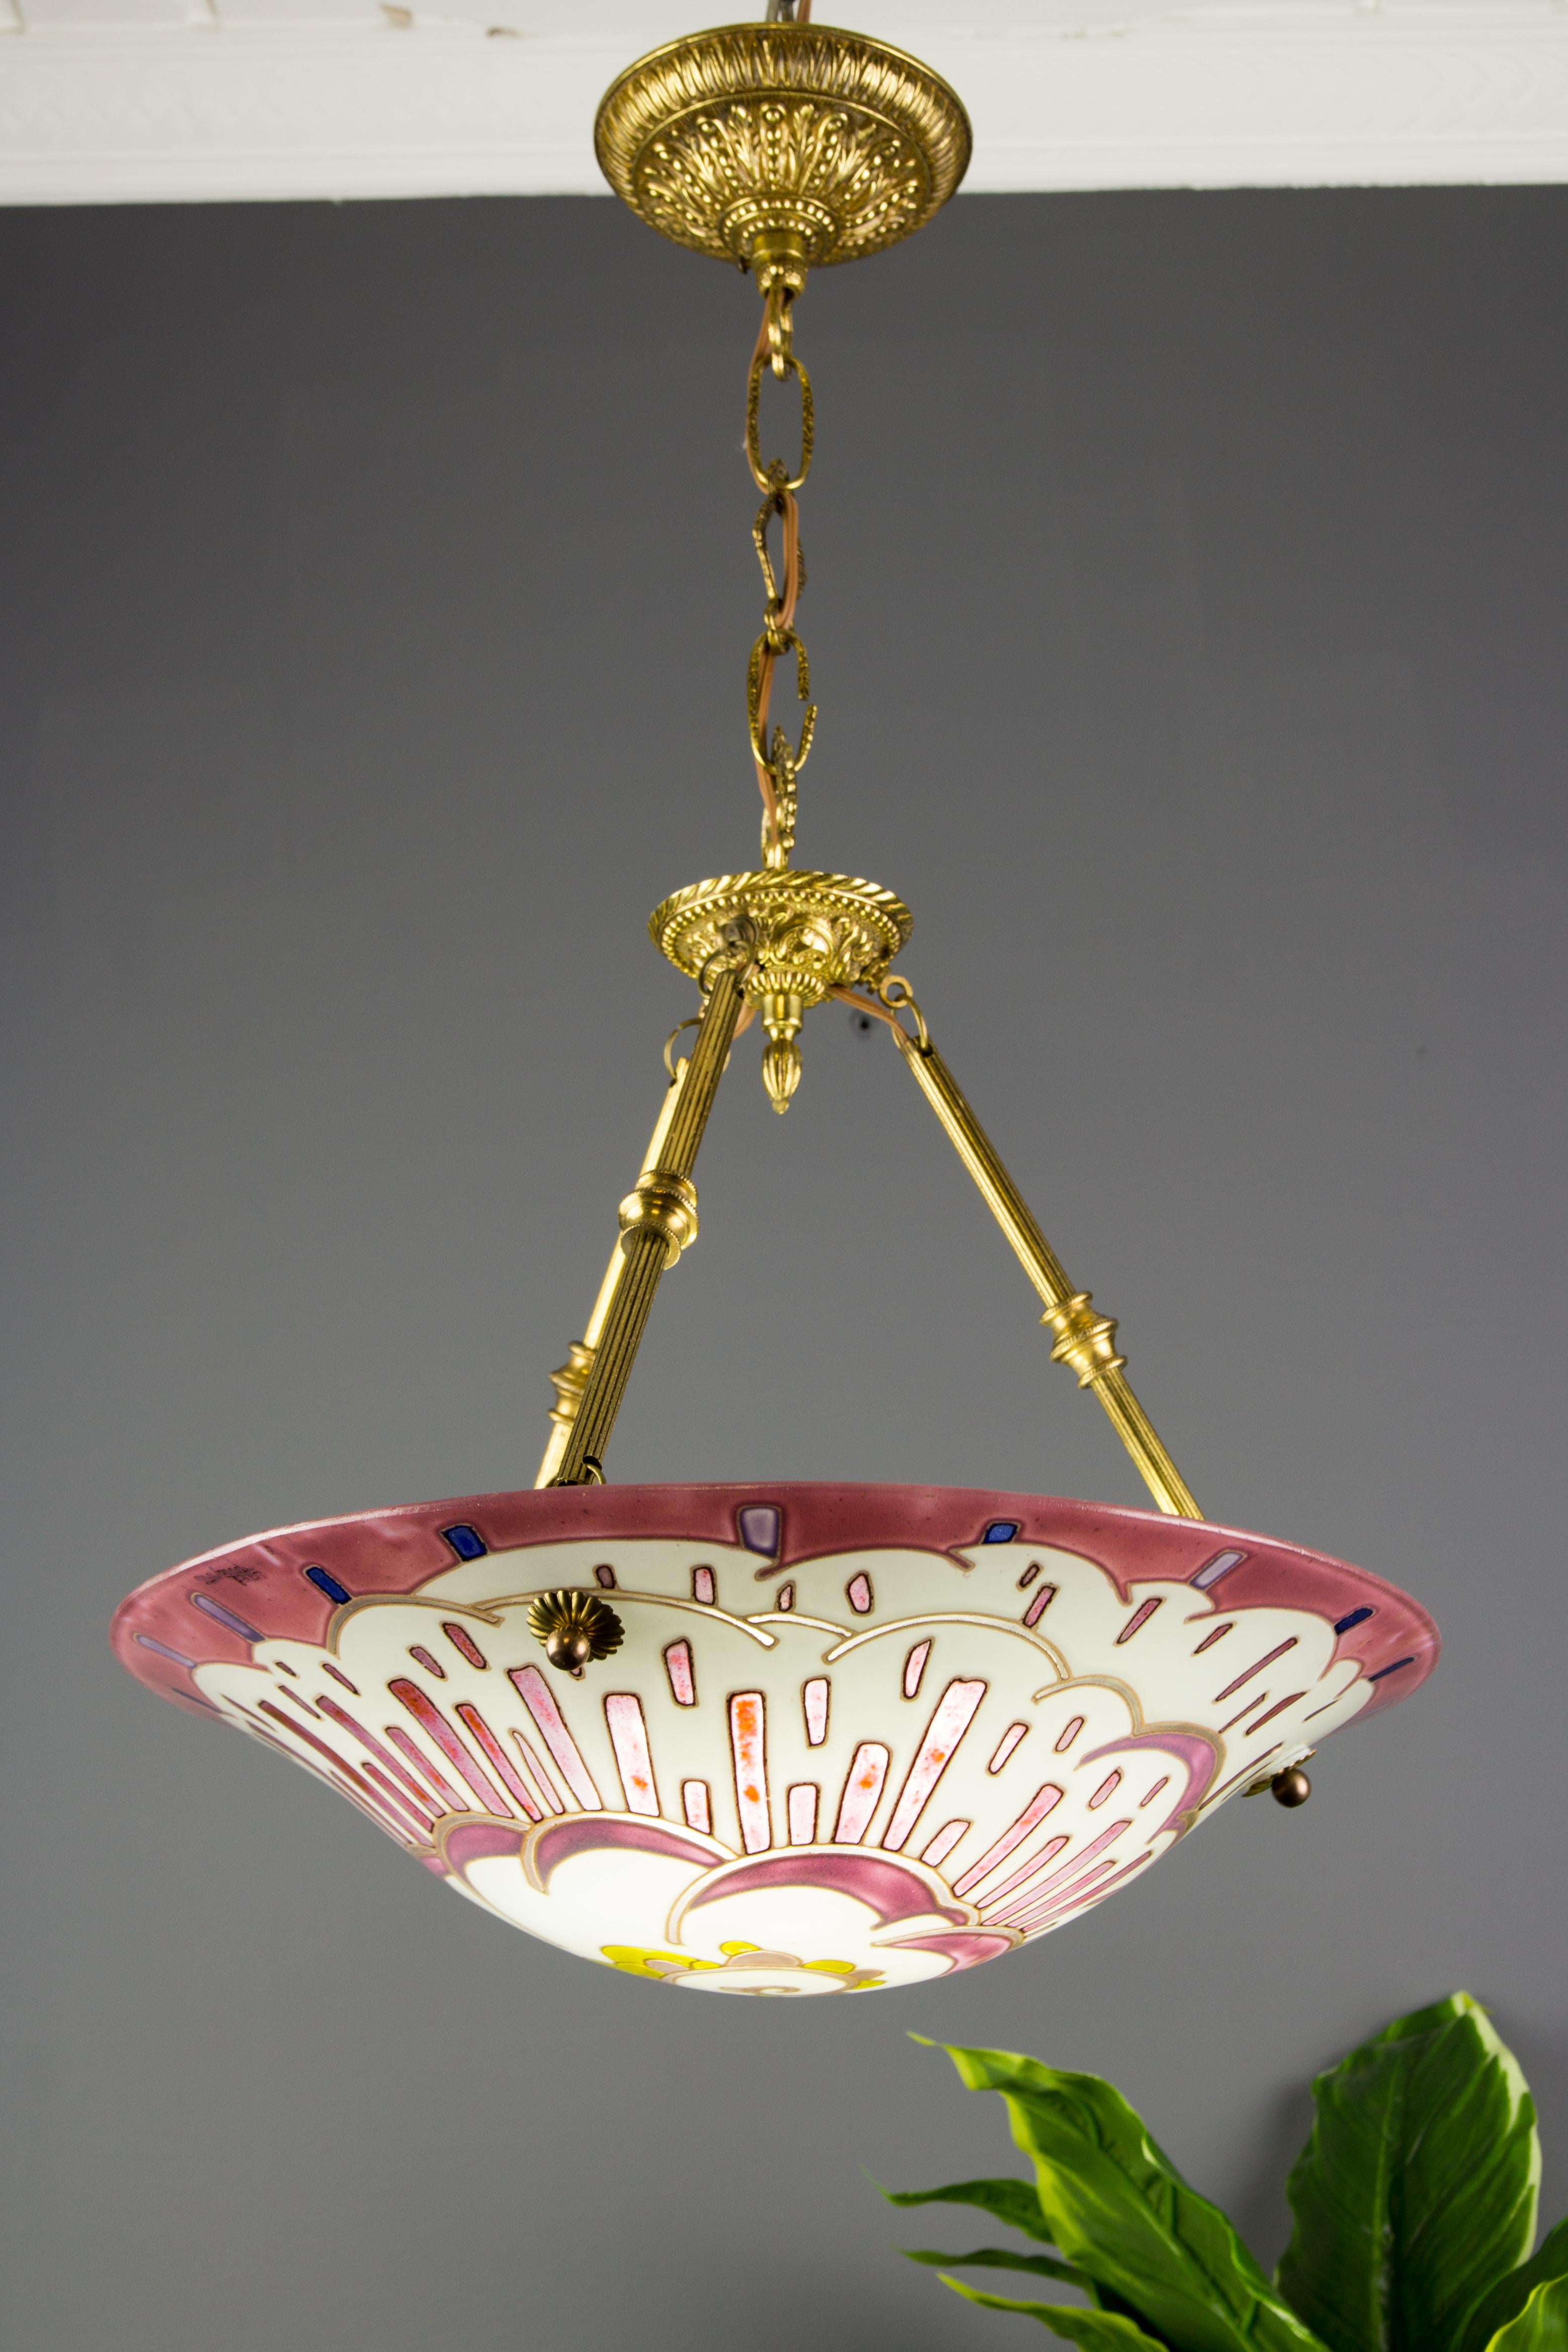 A colorful and charming Art Deco pendant light by Maxonade Verrier D’Art, Paris, with modernist geometric pattern decoration, predominately in pink, purple, yellow, brown, and blue. The drawing is hand-painted and made using enamel paint with a very